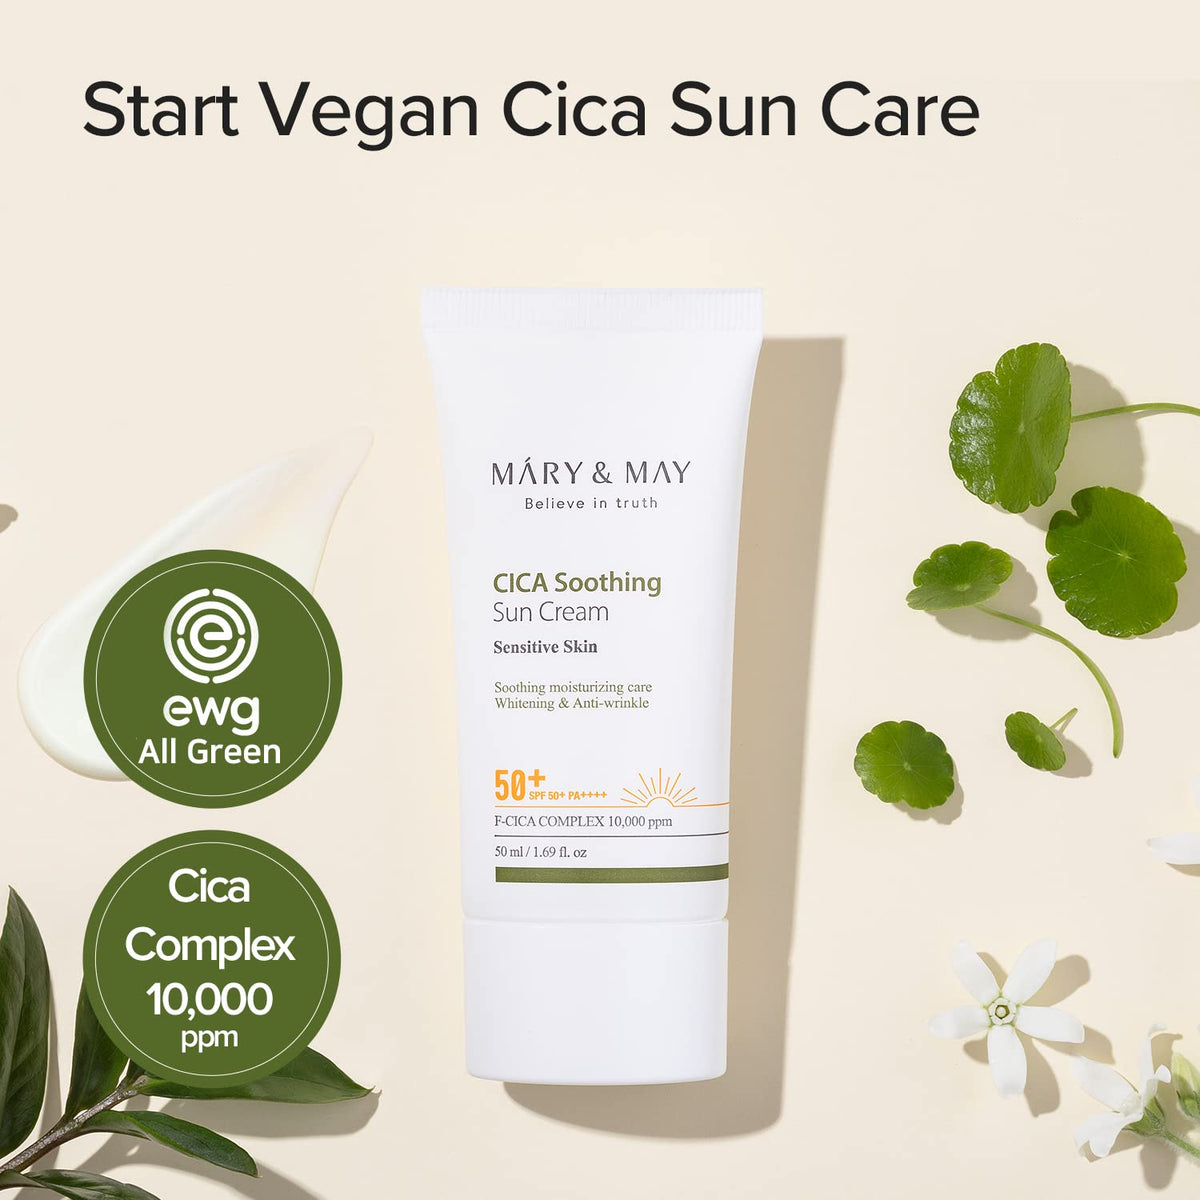 Mary & May - CICA Soothing Sun Cream SPF50+ PA++++ 50ml